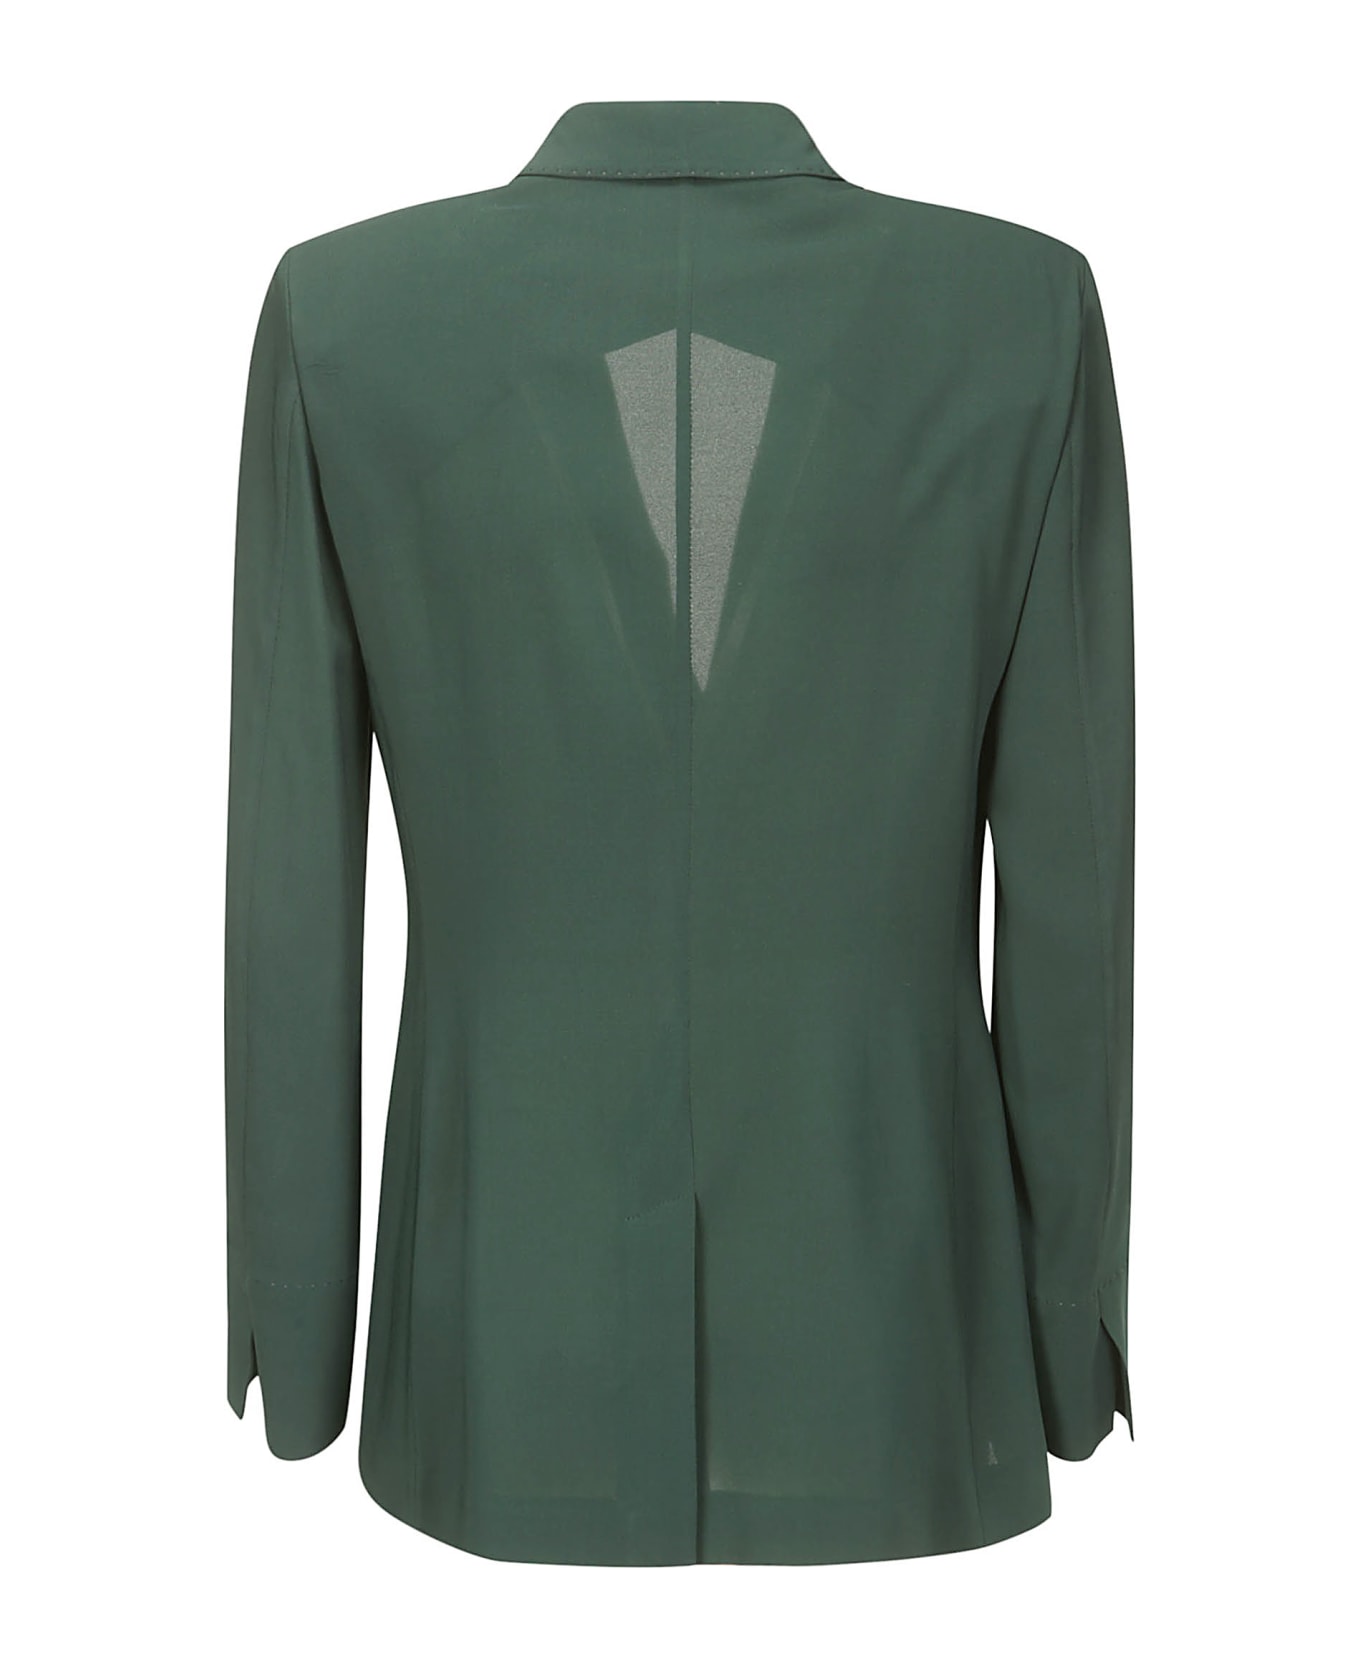 Alberto Biani Georgette Double-breasted Jacket - GREEN ブレザー